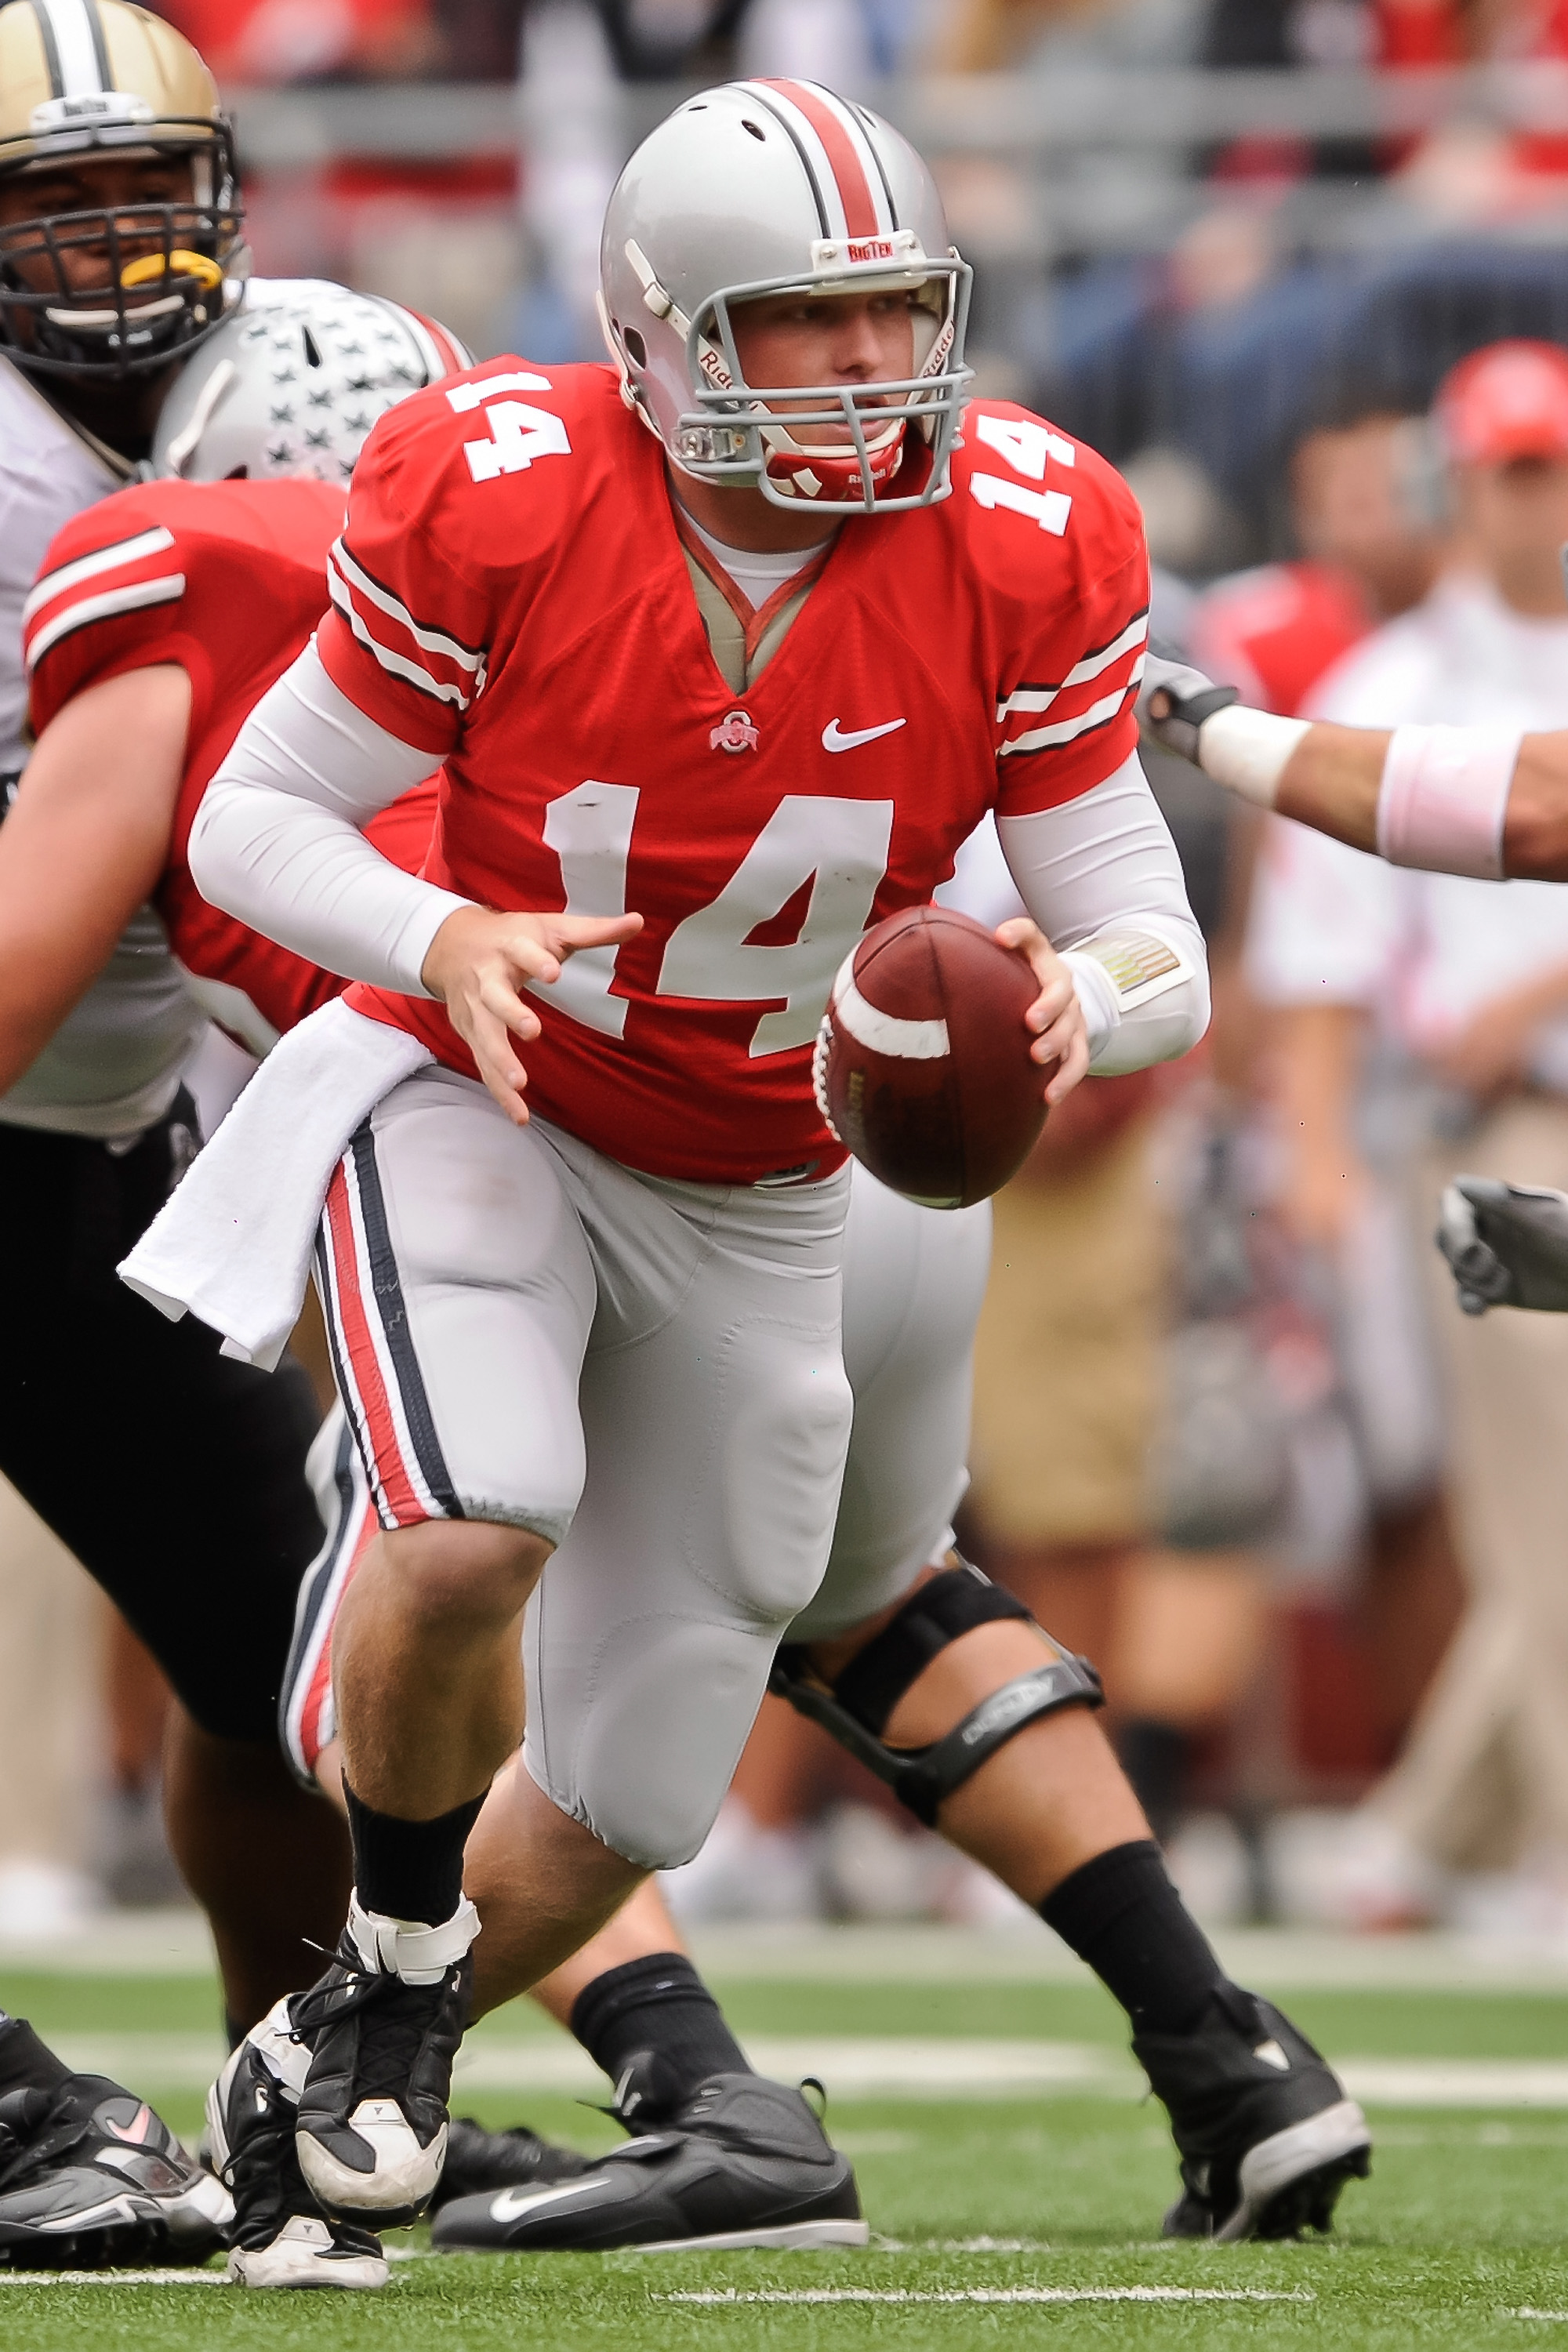 COLUMBUS, OH - OCTOBER 23:  Joe Bauserman #14 of the Ohio State Buckeyes hands off the ball against the Purdue Boilermakers at Ohio Stadium on October 23, 2010 in Columbus, Ohio.  (Photo by Jamie Sabau/Getty Images)